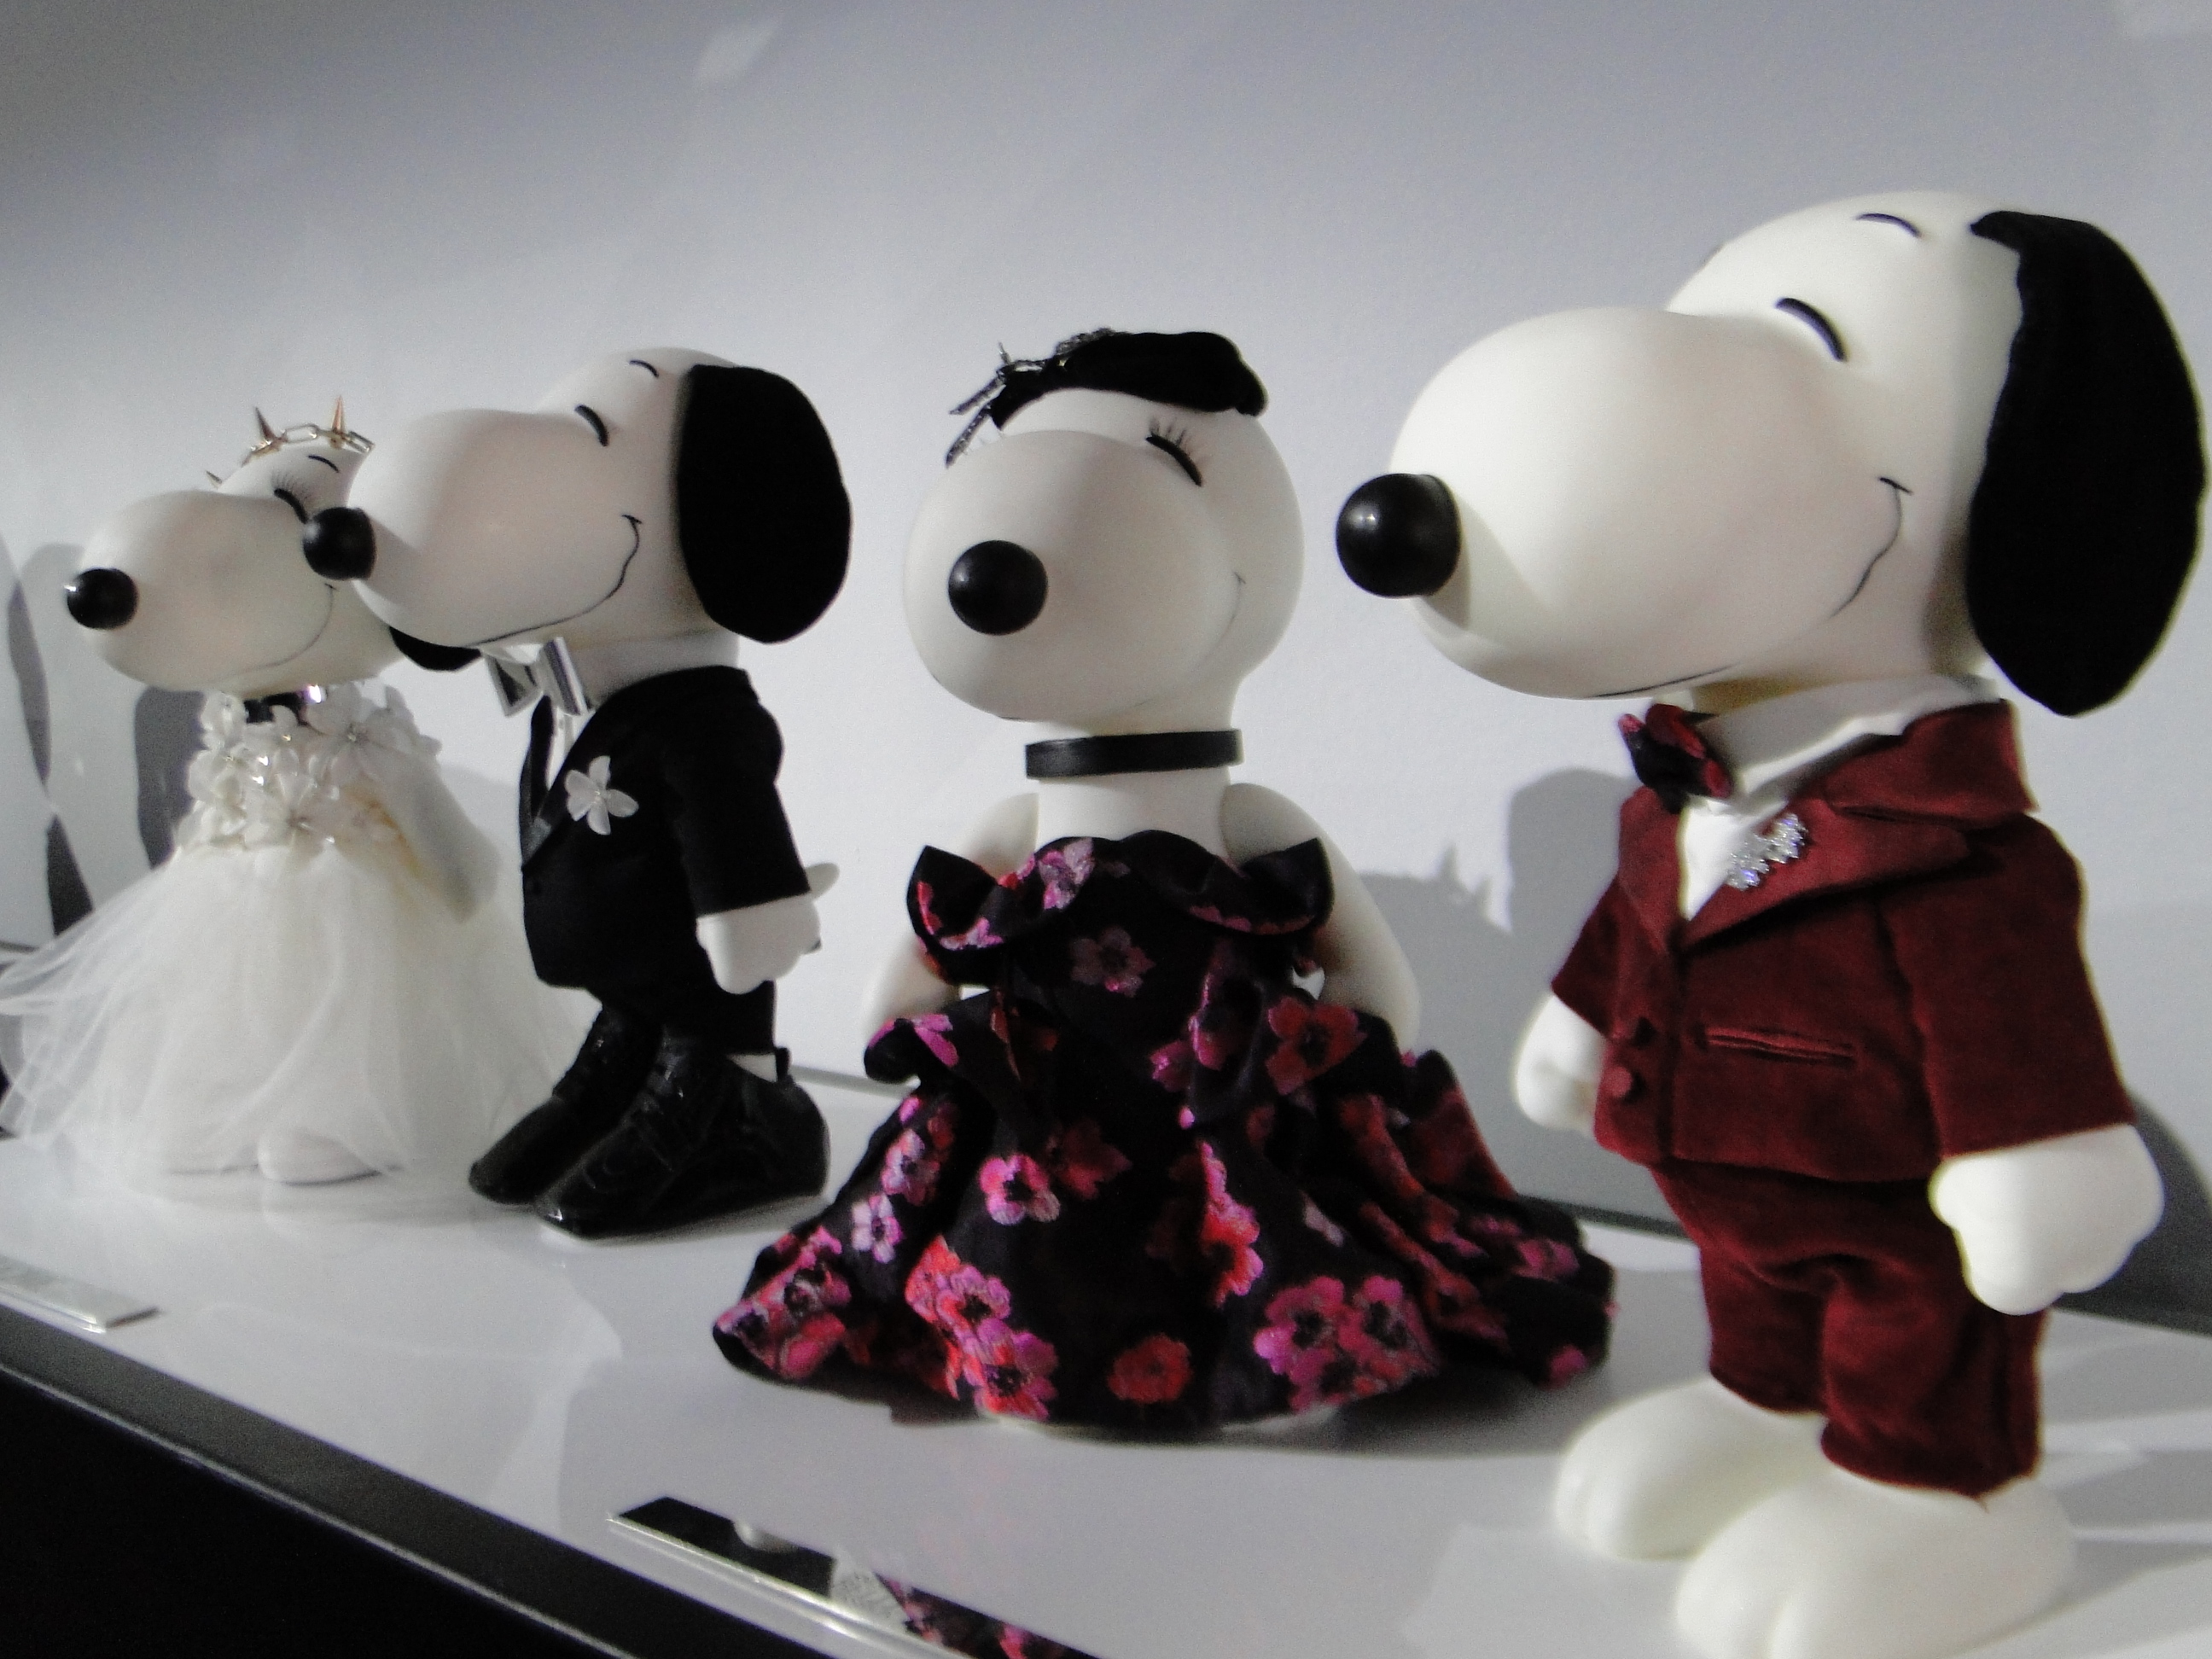 SNOOPY AND BELE IN FASHION Paris France Exhibition Exposition - Palais de Tokyo - copyright Go with the Blog DSC06442